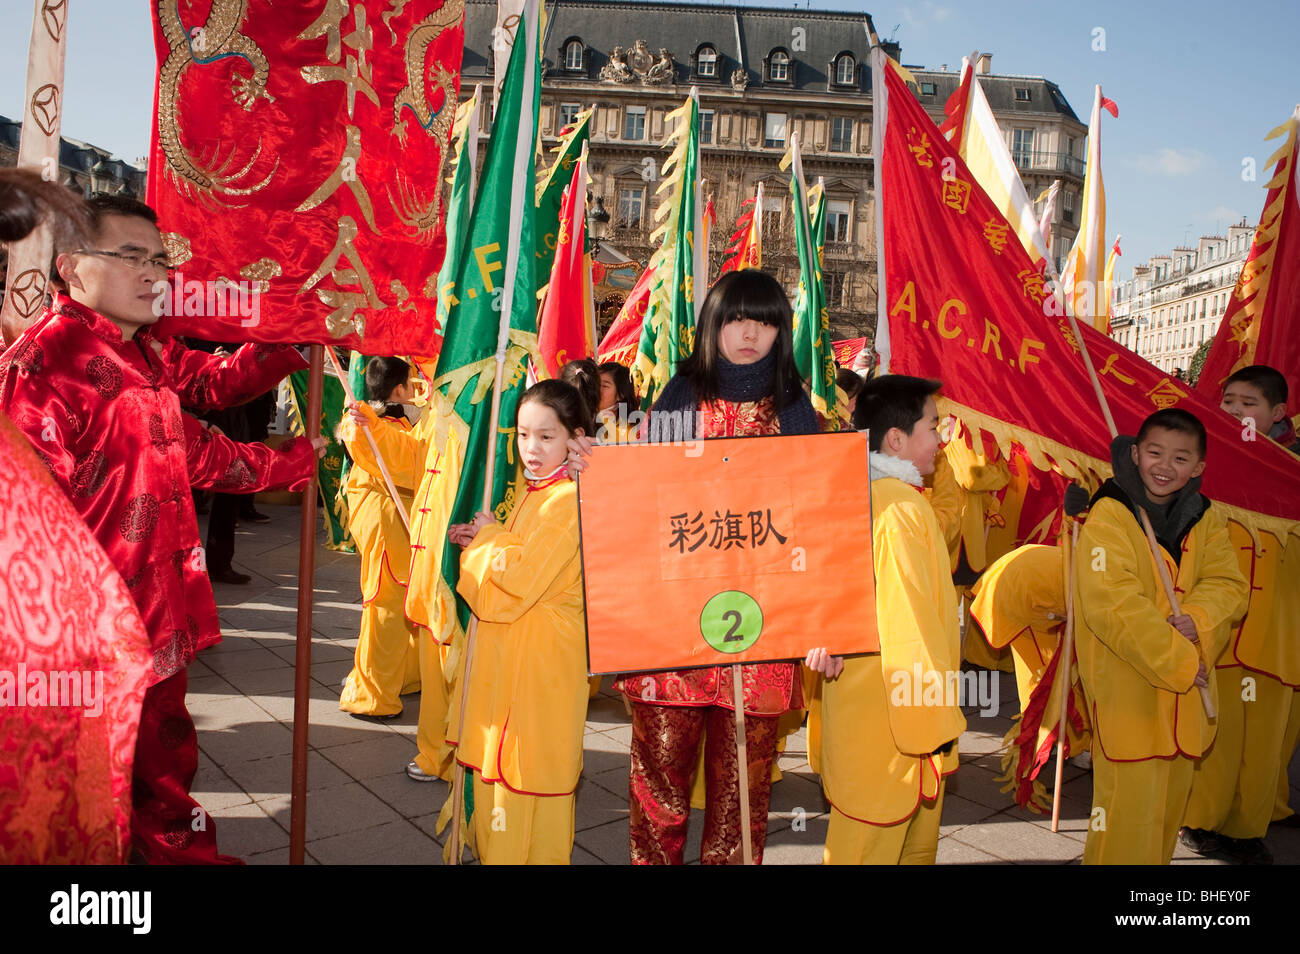 Paris, France, Asians Celebrating 'Chinese New year' Annual Street Carnival Parade, Chinese Teenagers Stock Photo